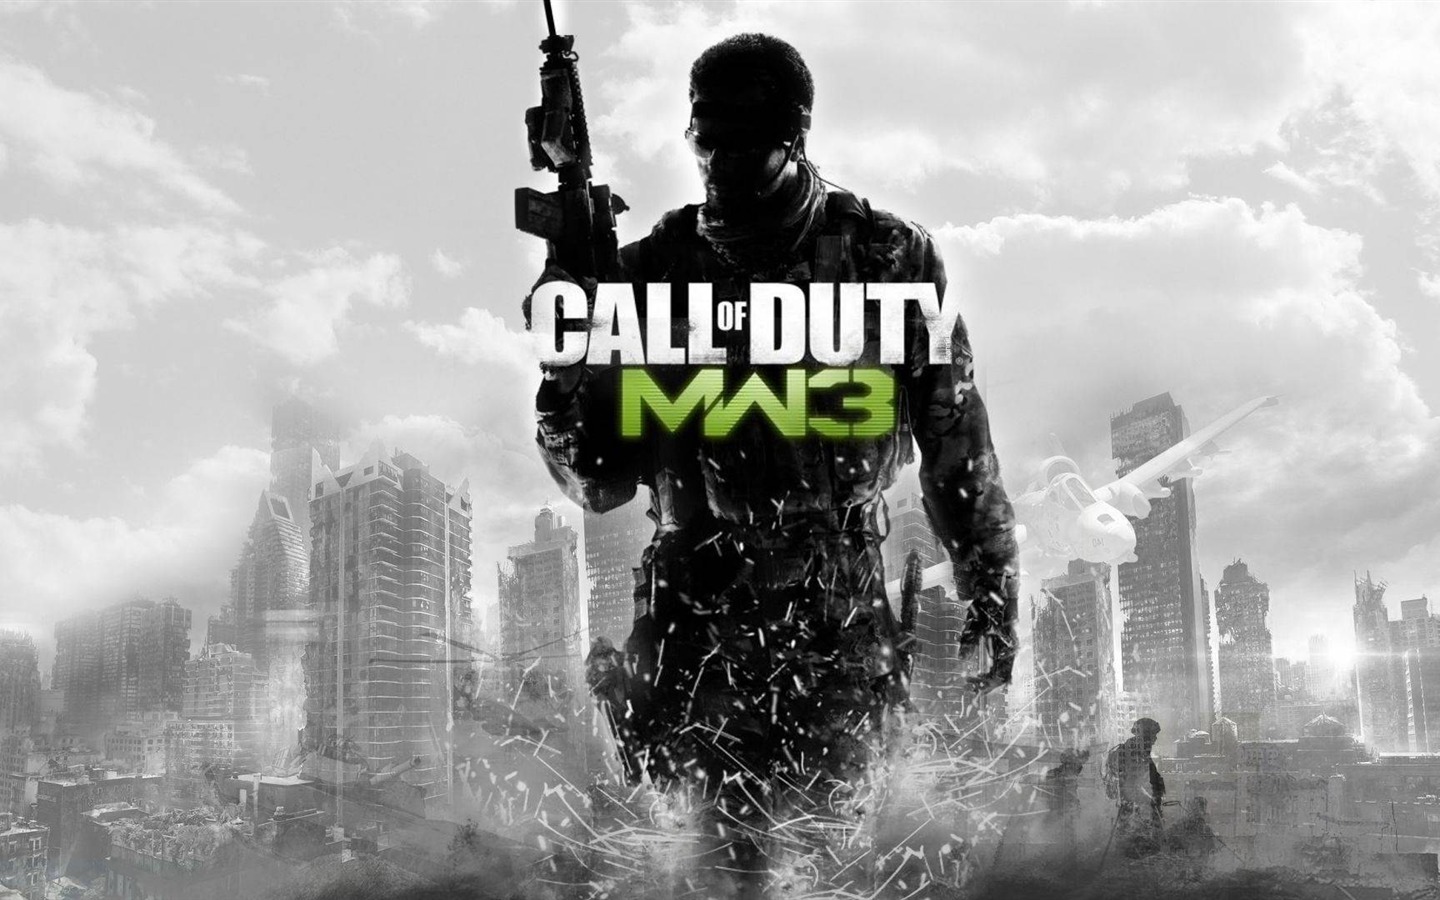 Call of Duty: MW3 HD wallpapers #1 - 1440x900